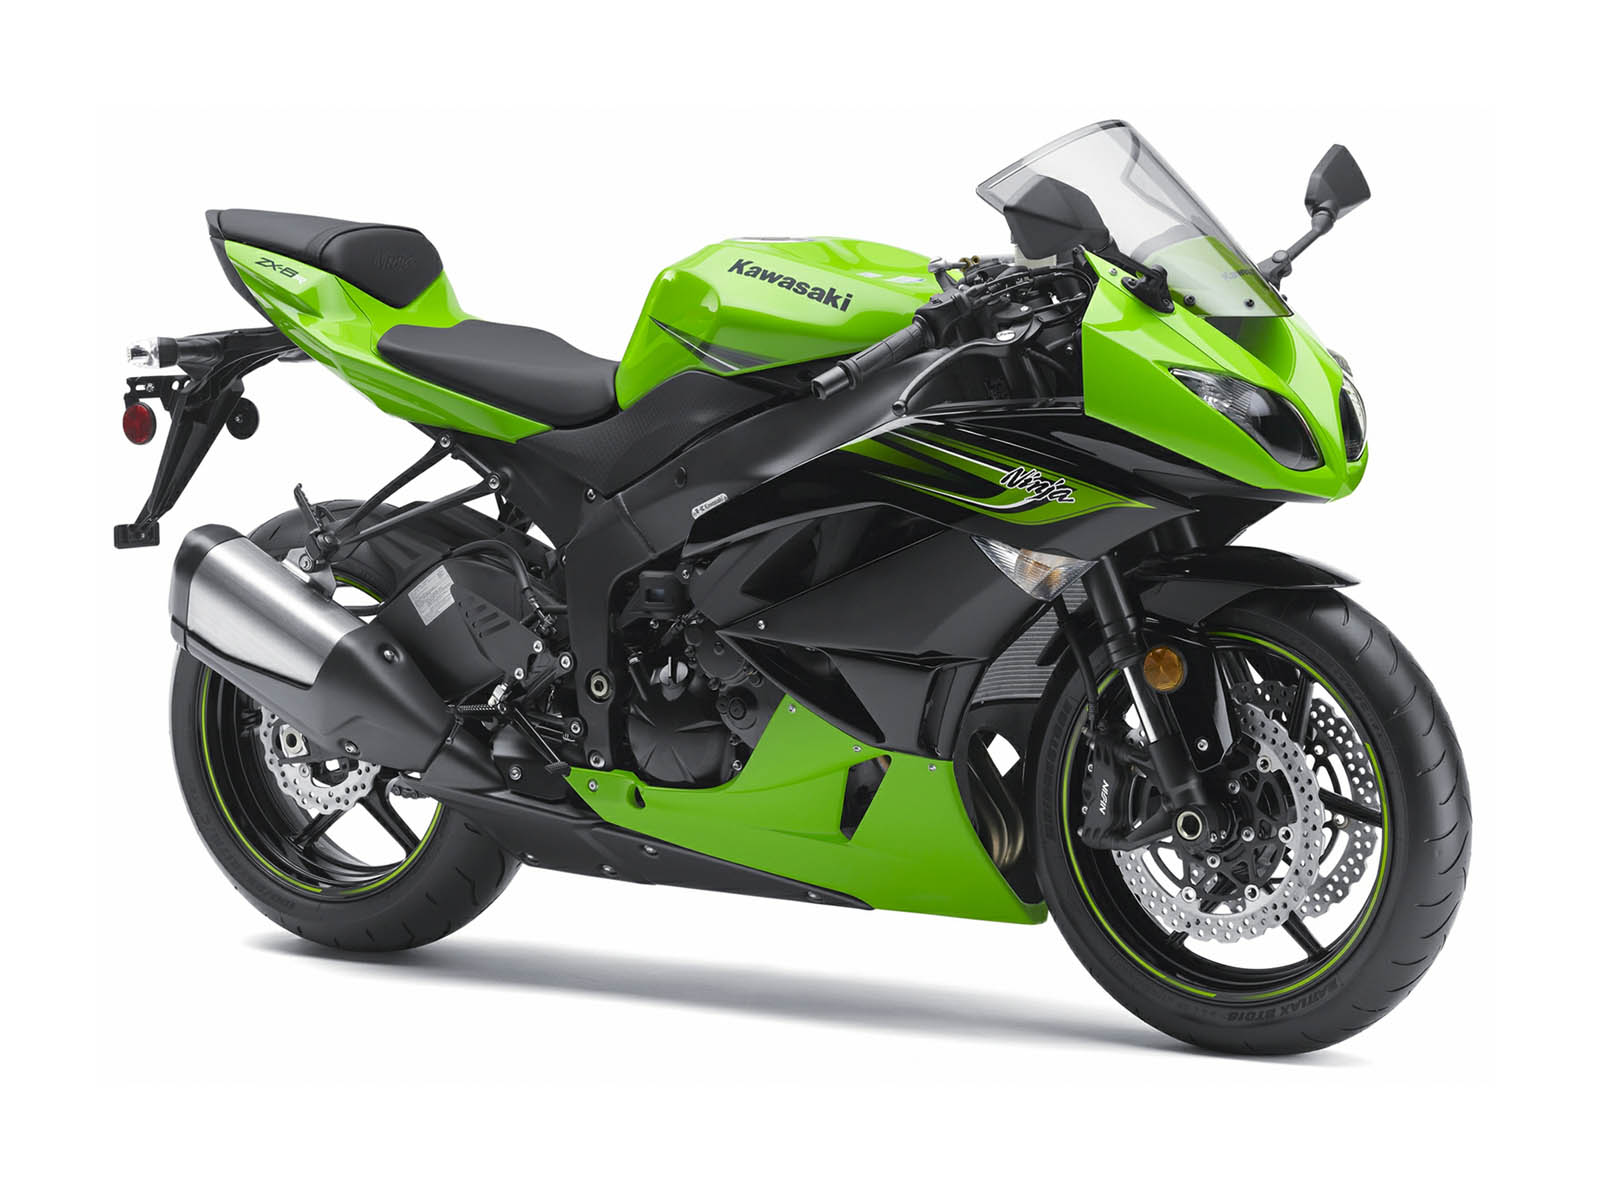 Ninja Zx 6r Bike Wallpaper Image Photos Pictures And Background For